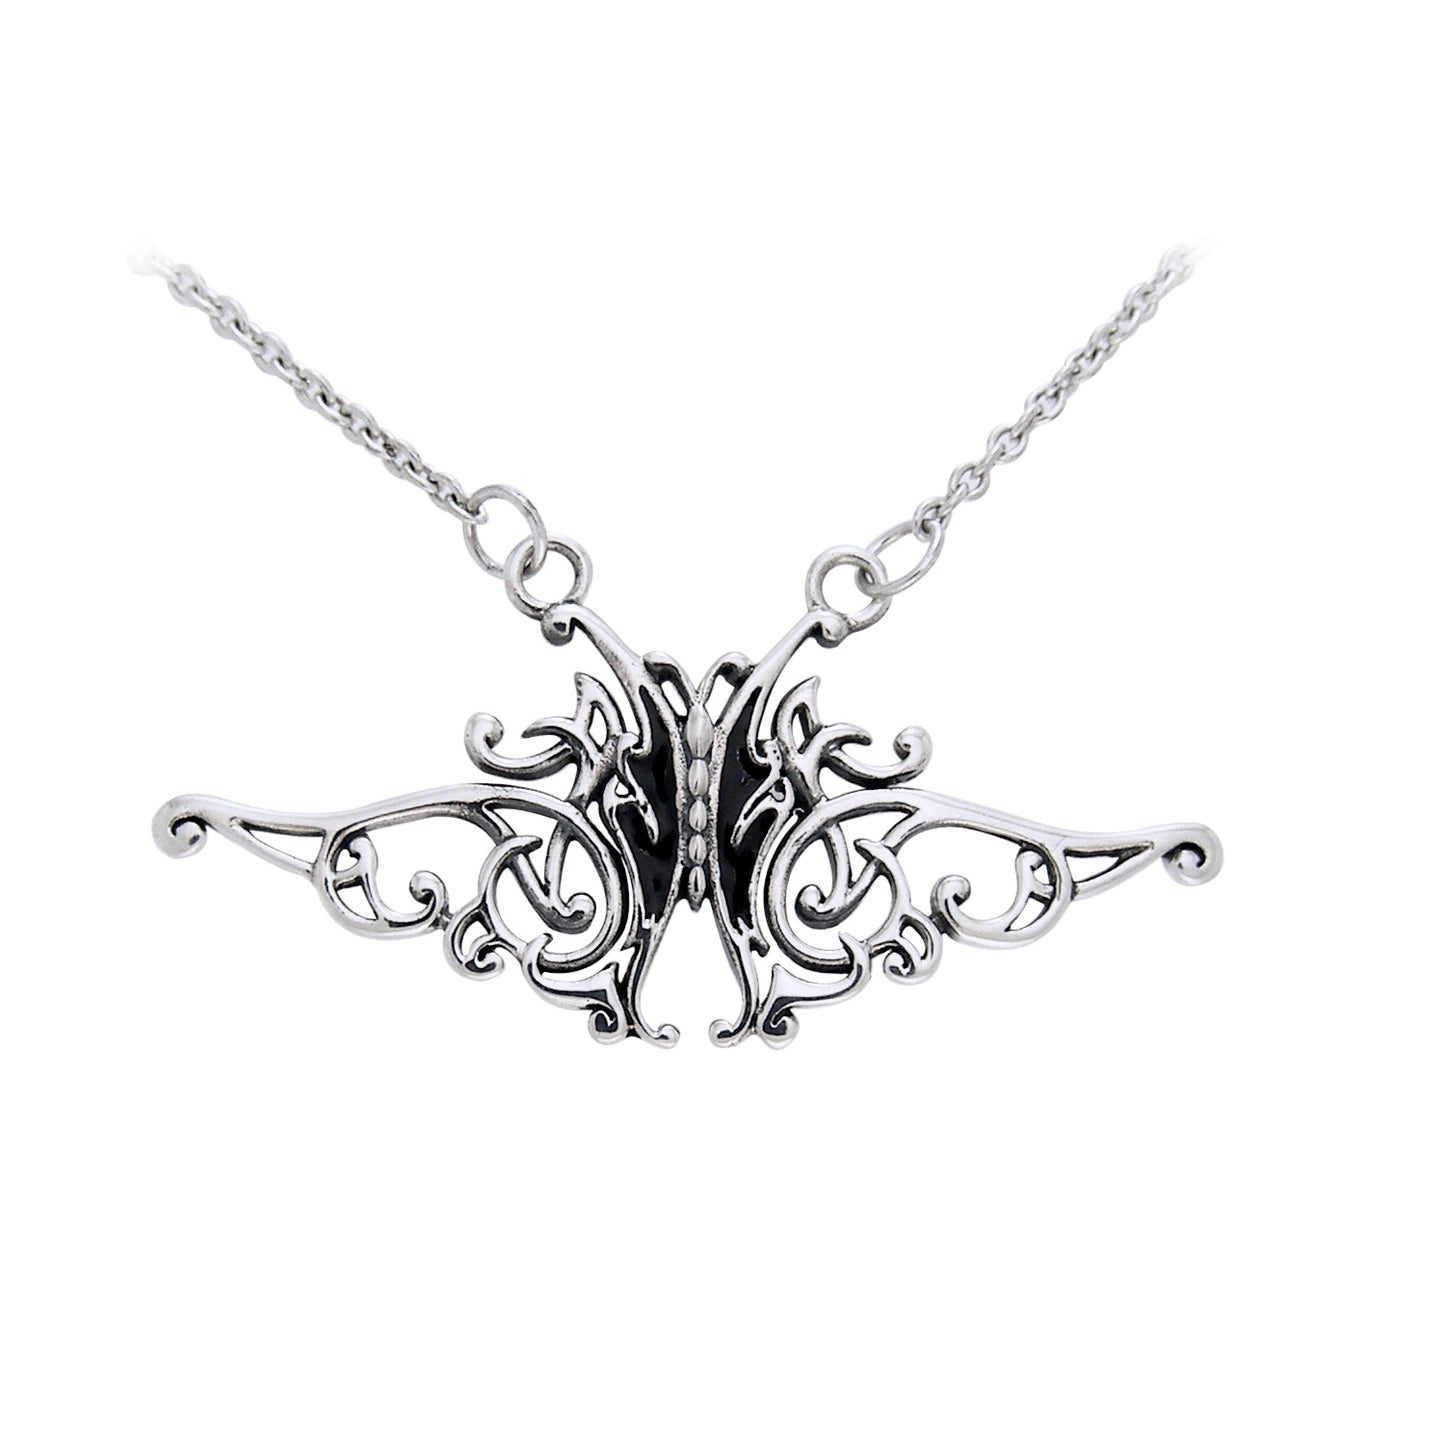 Flowing Celtic Knot and Black Butterfly Sterling Silver Adjustable 17" Necklace - Silver Insanity